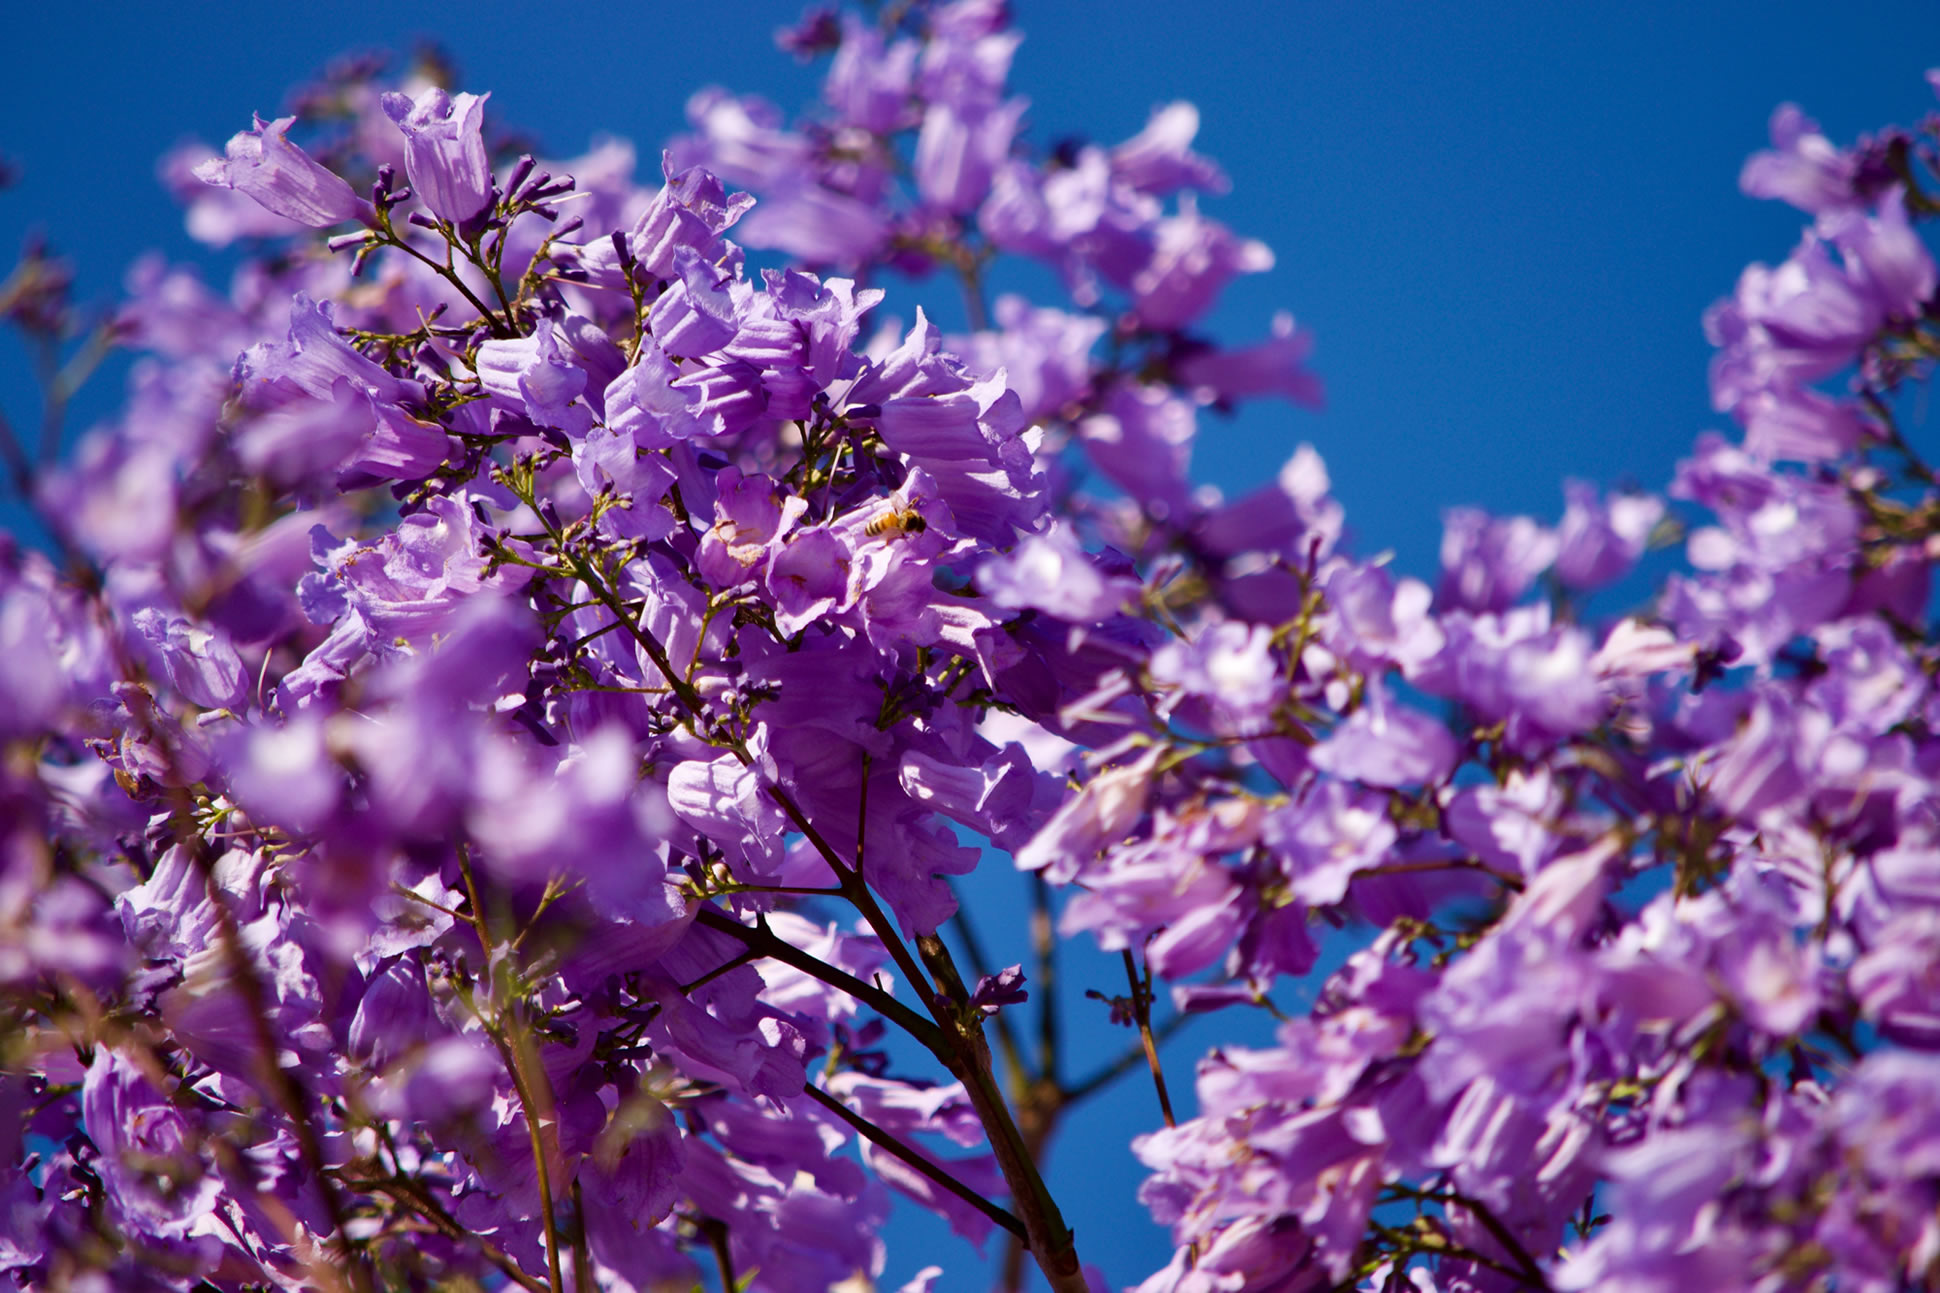 Photo of purple flowers against a blue sky. There is a bee on one of the flowers.